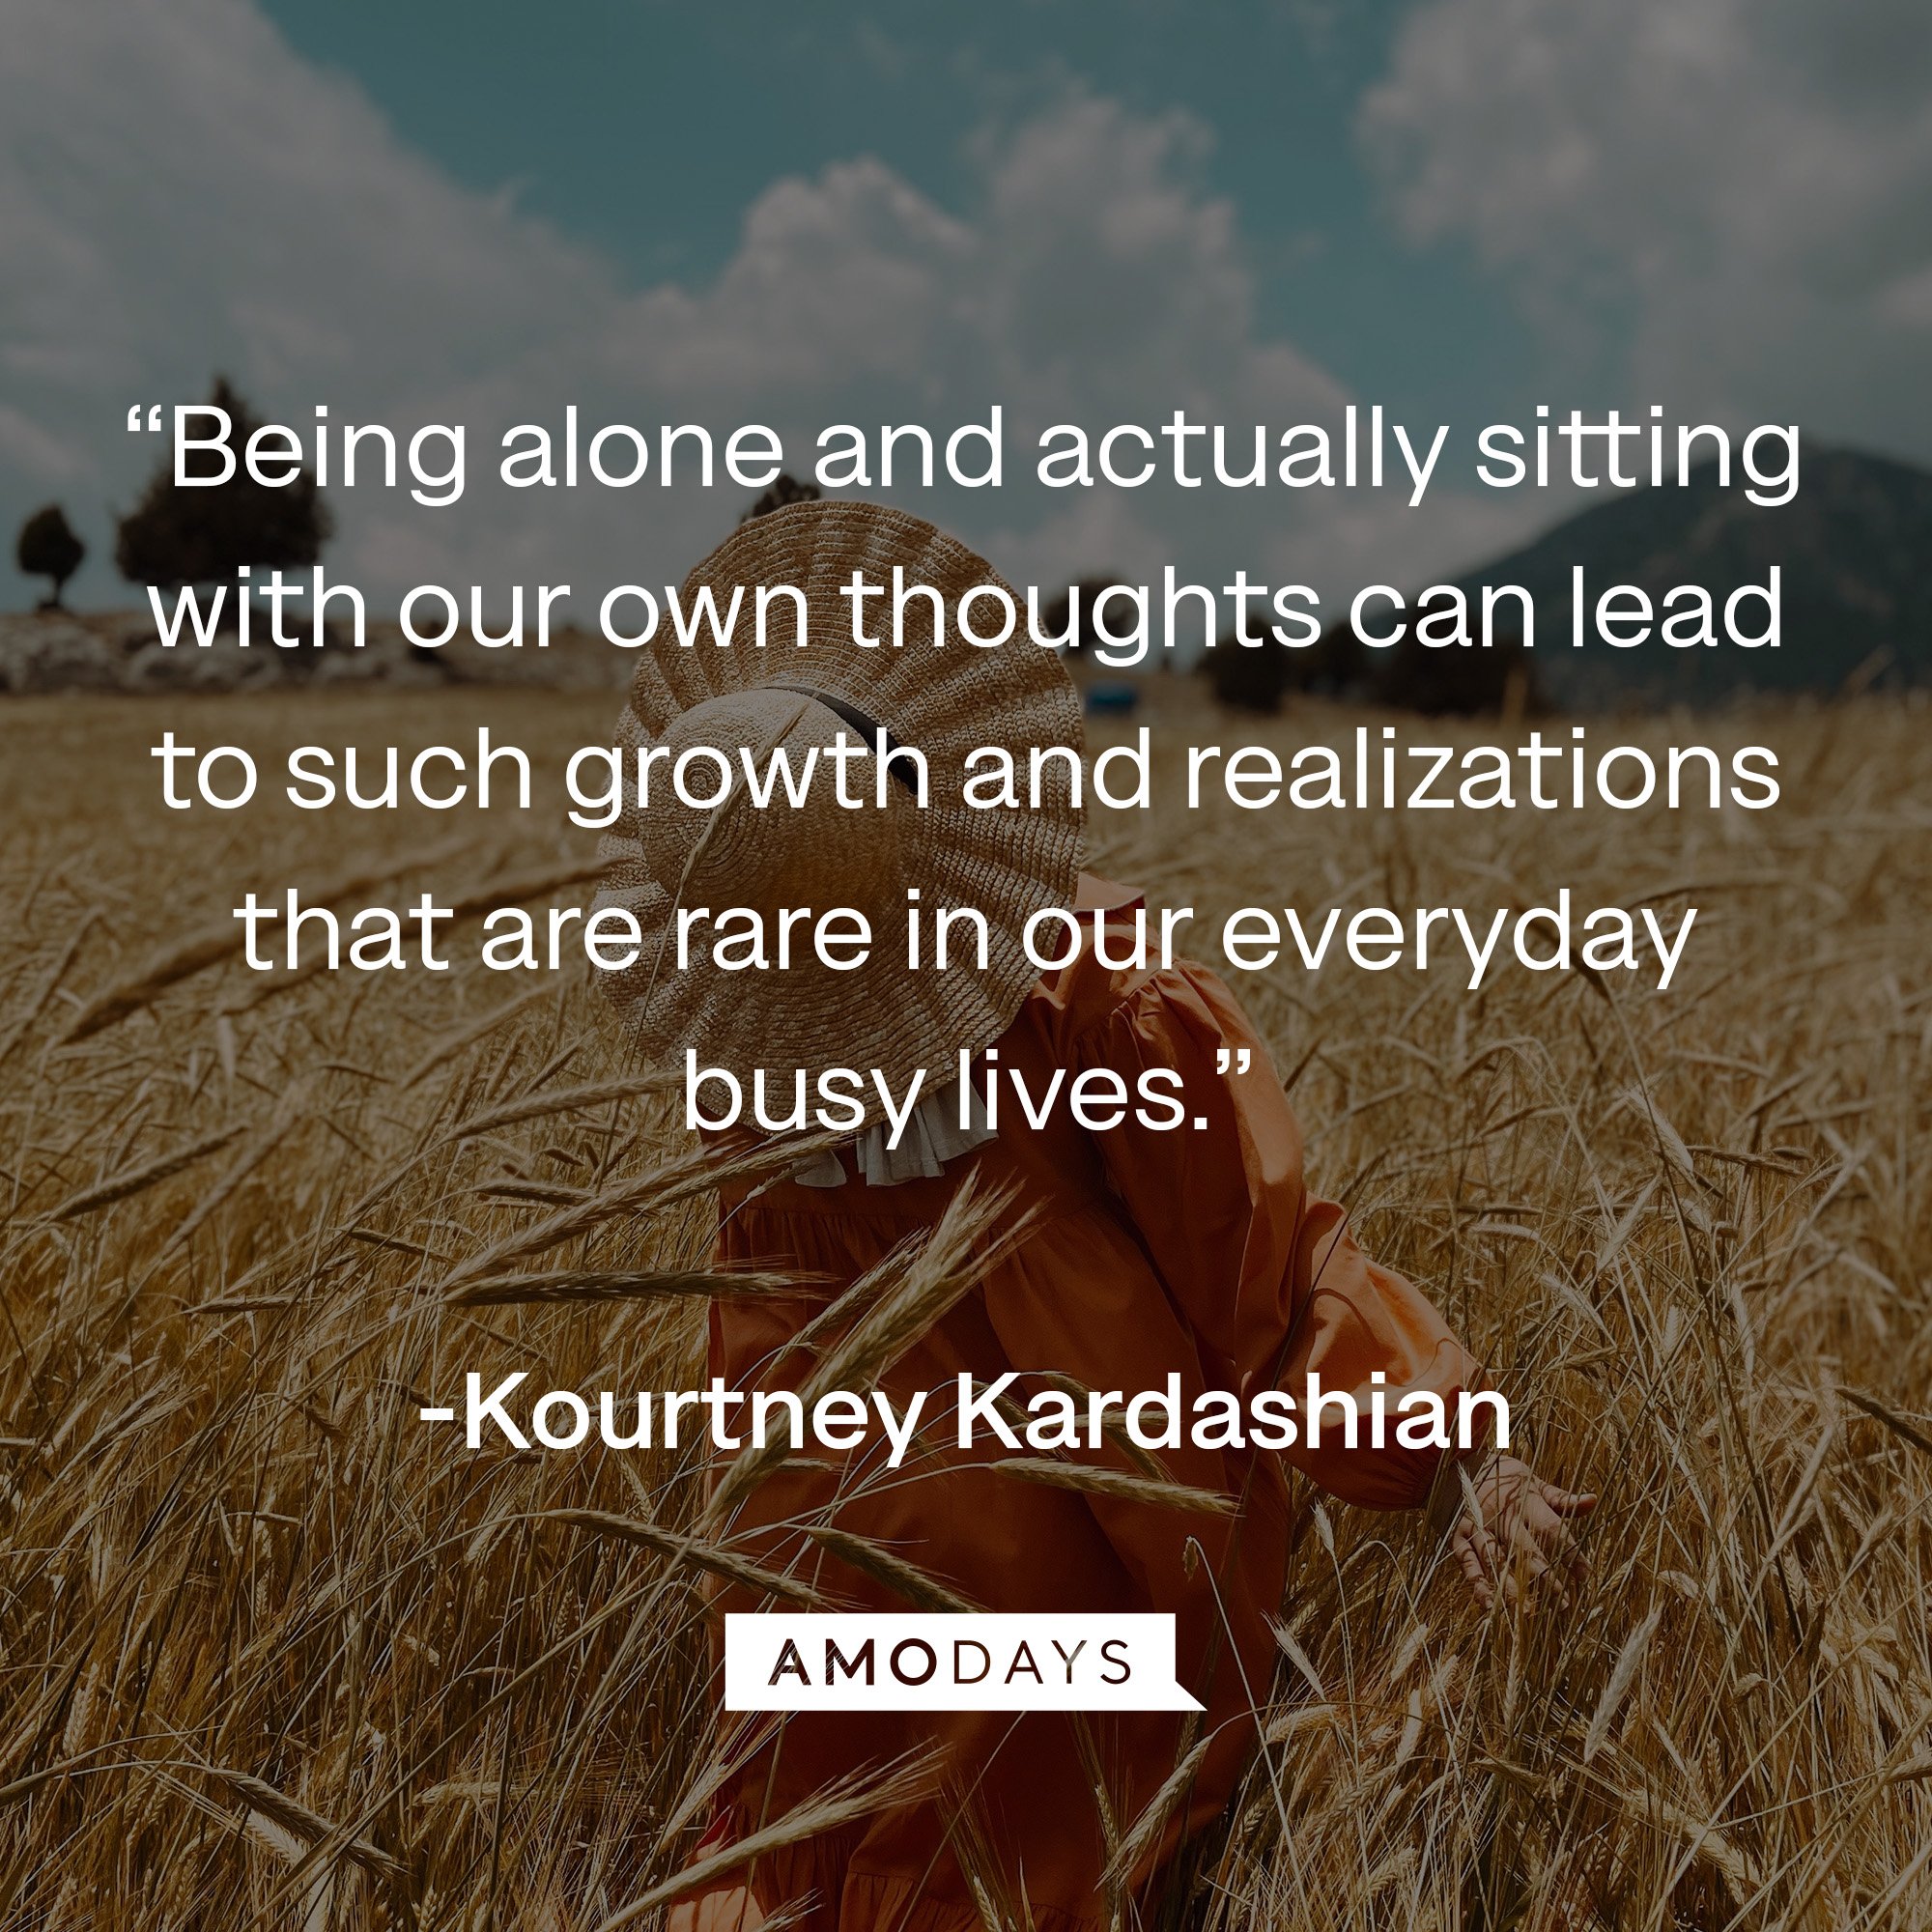 Kourtney Kardashian’s quote: “Being alone and actually sitting with our own thoughts can lead to such growth and realizations that are rare in our everyday busy lives.” | Image: Amodays